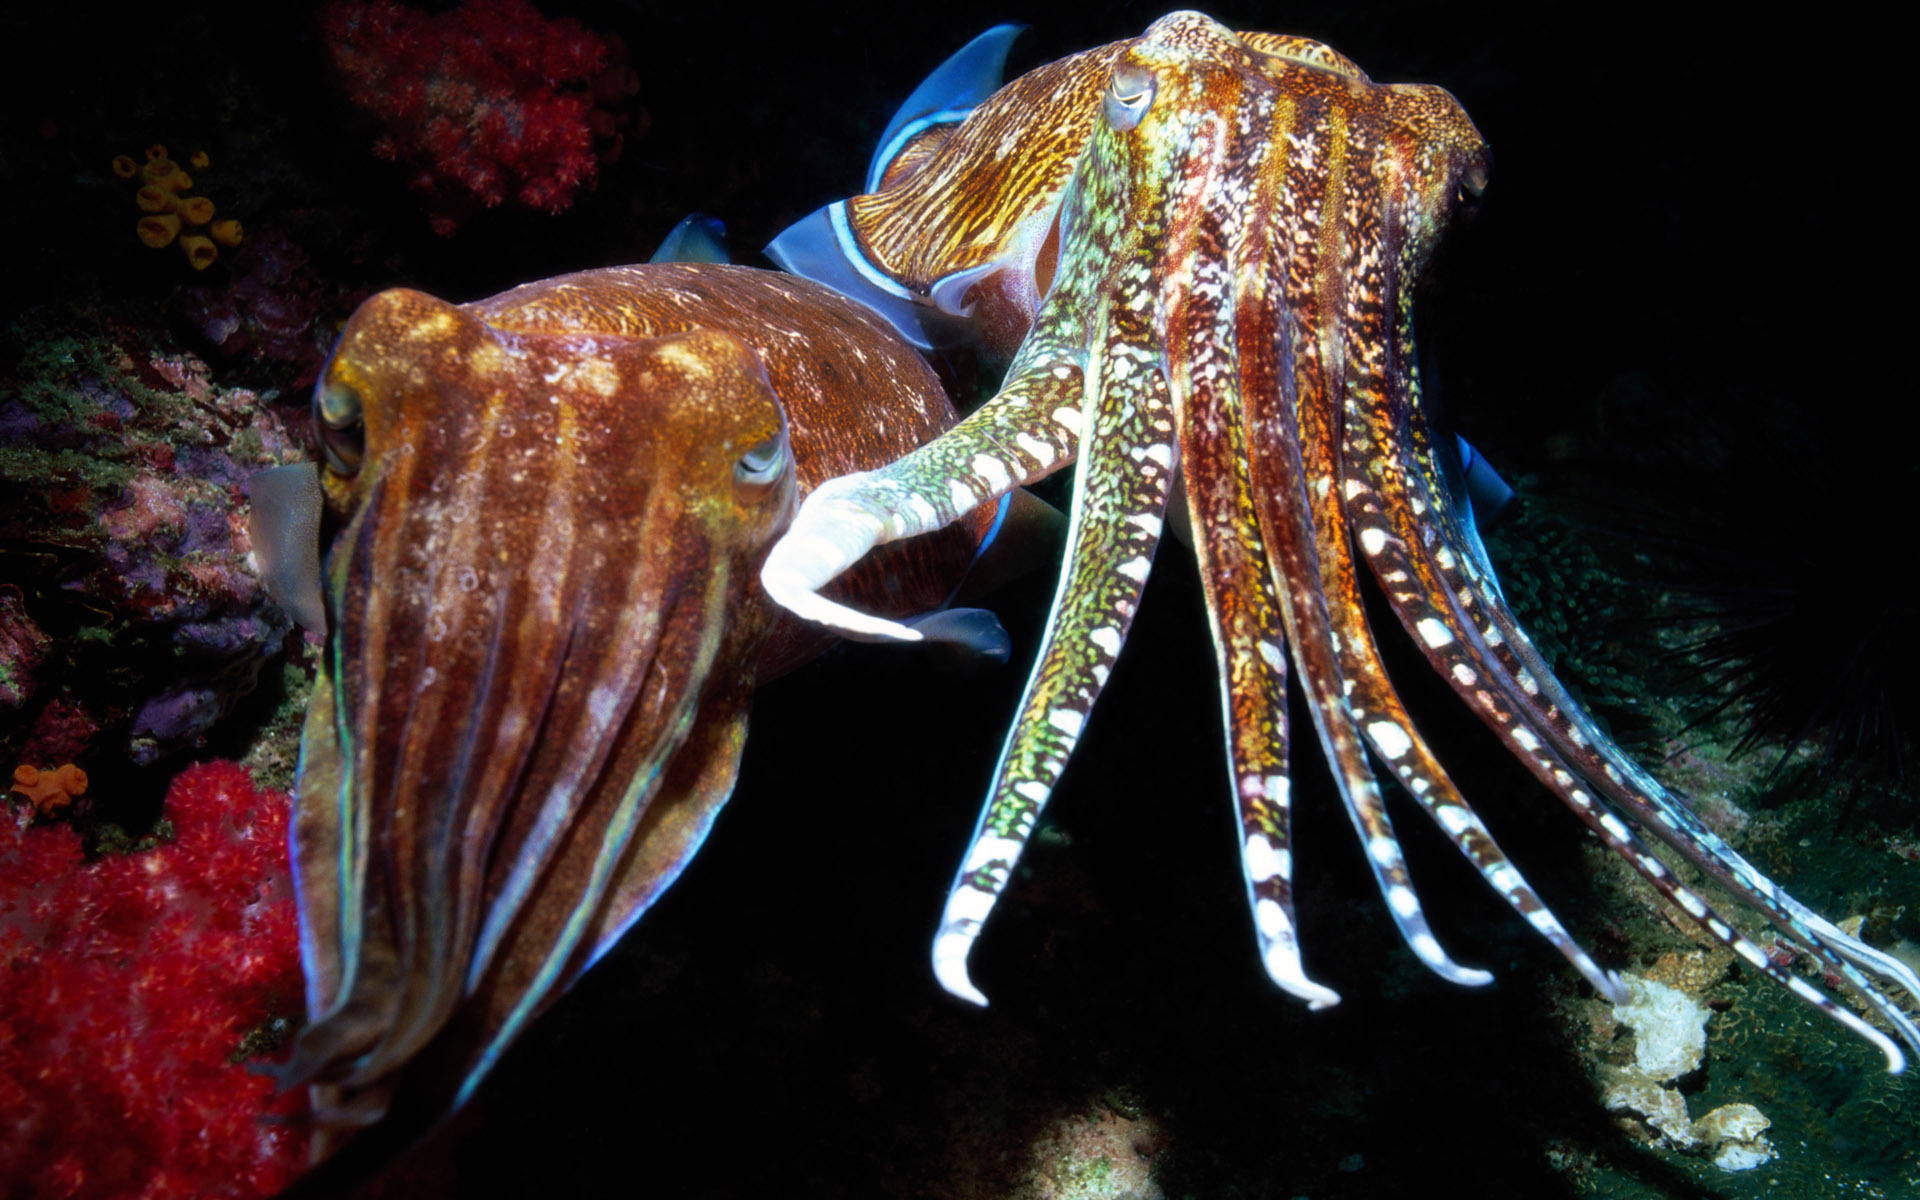 Cuttlefish Live Wallpaper APK (Android App) - Free Download